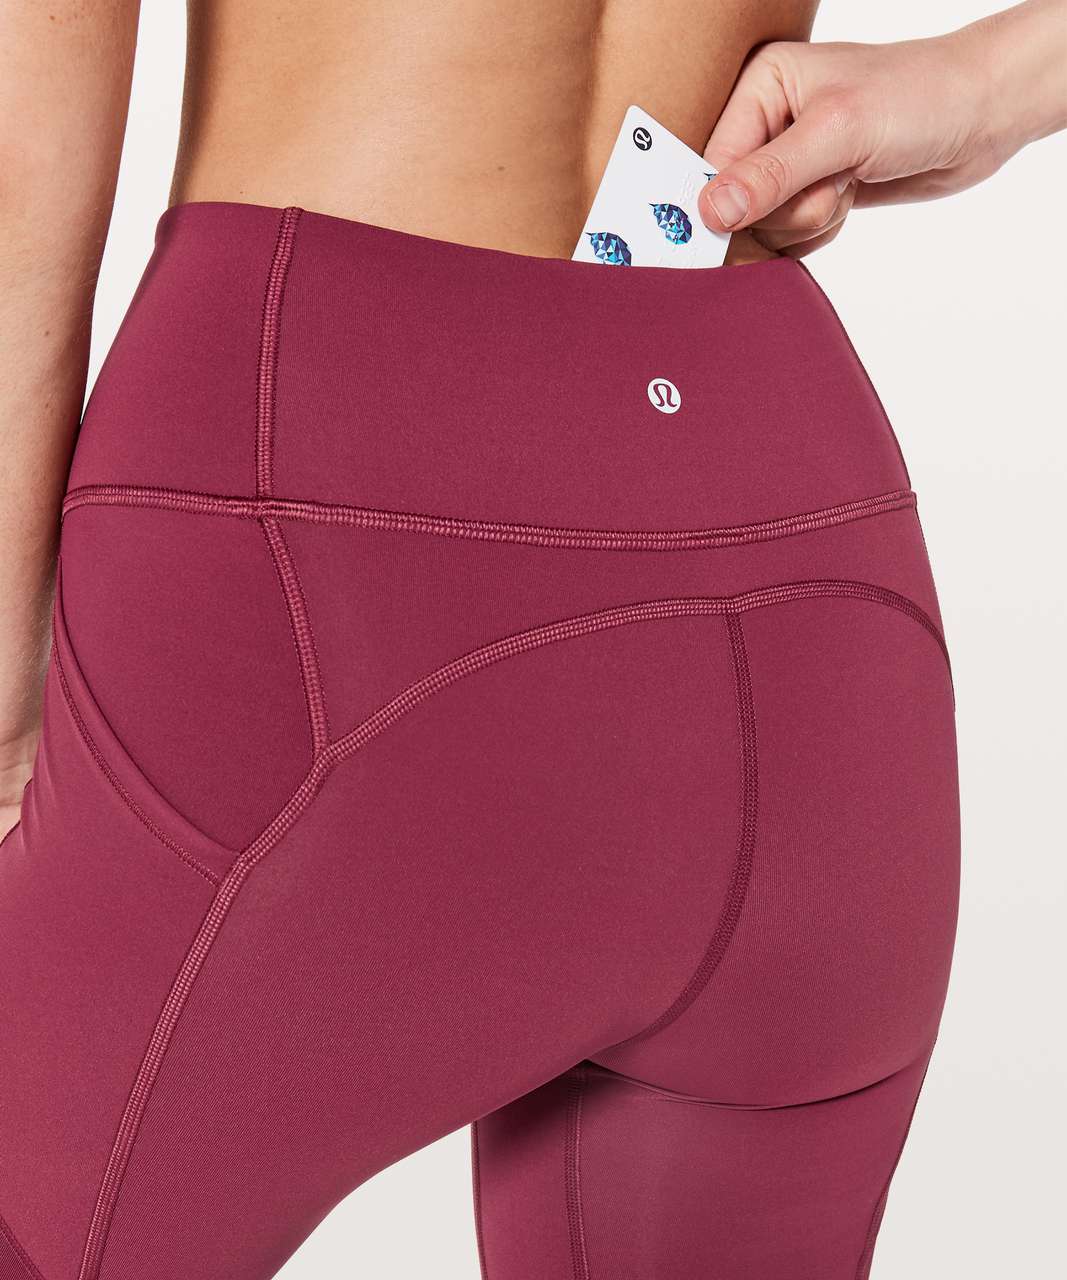 Lululemon All The Right Places Crop II *23" - Ruby Wine